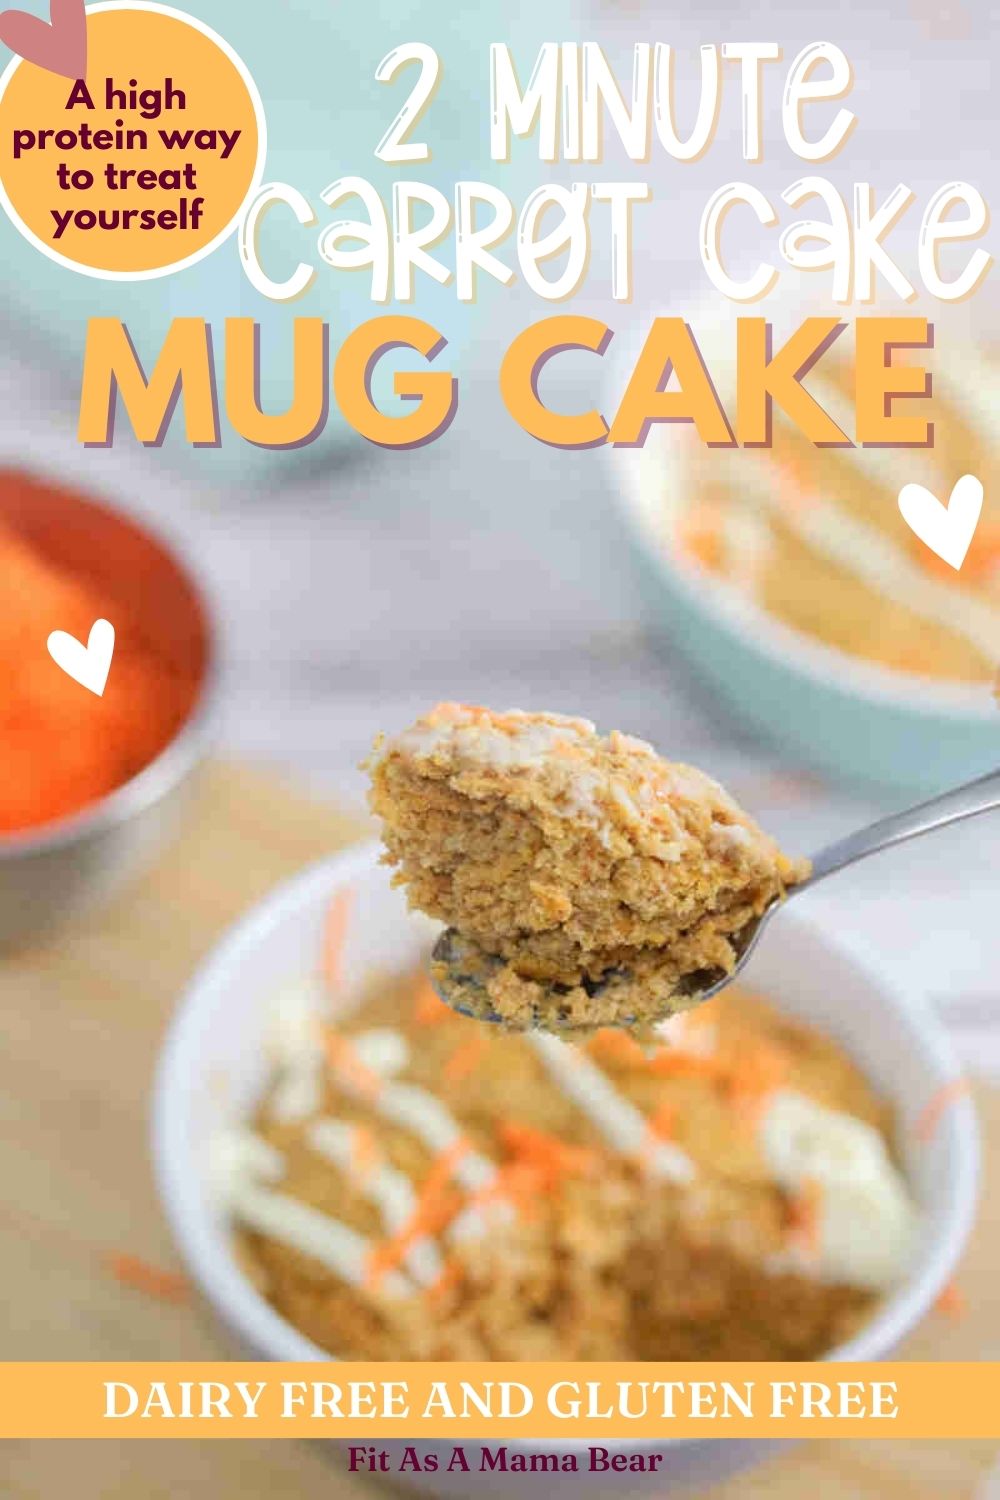 Carrot mug cake in a white ramekin with a spoonful coming out with text on the image.